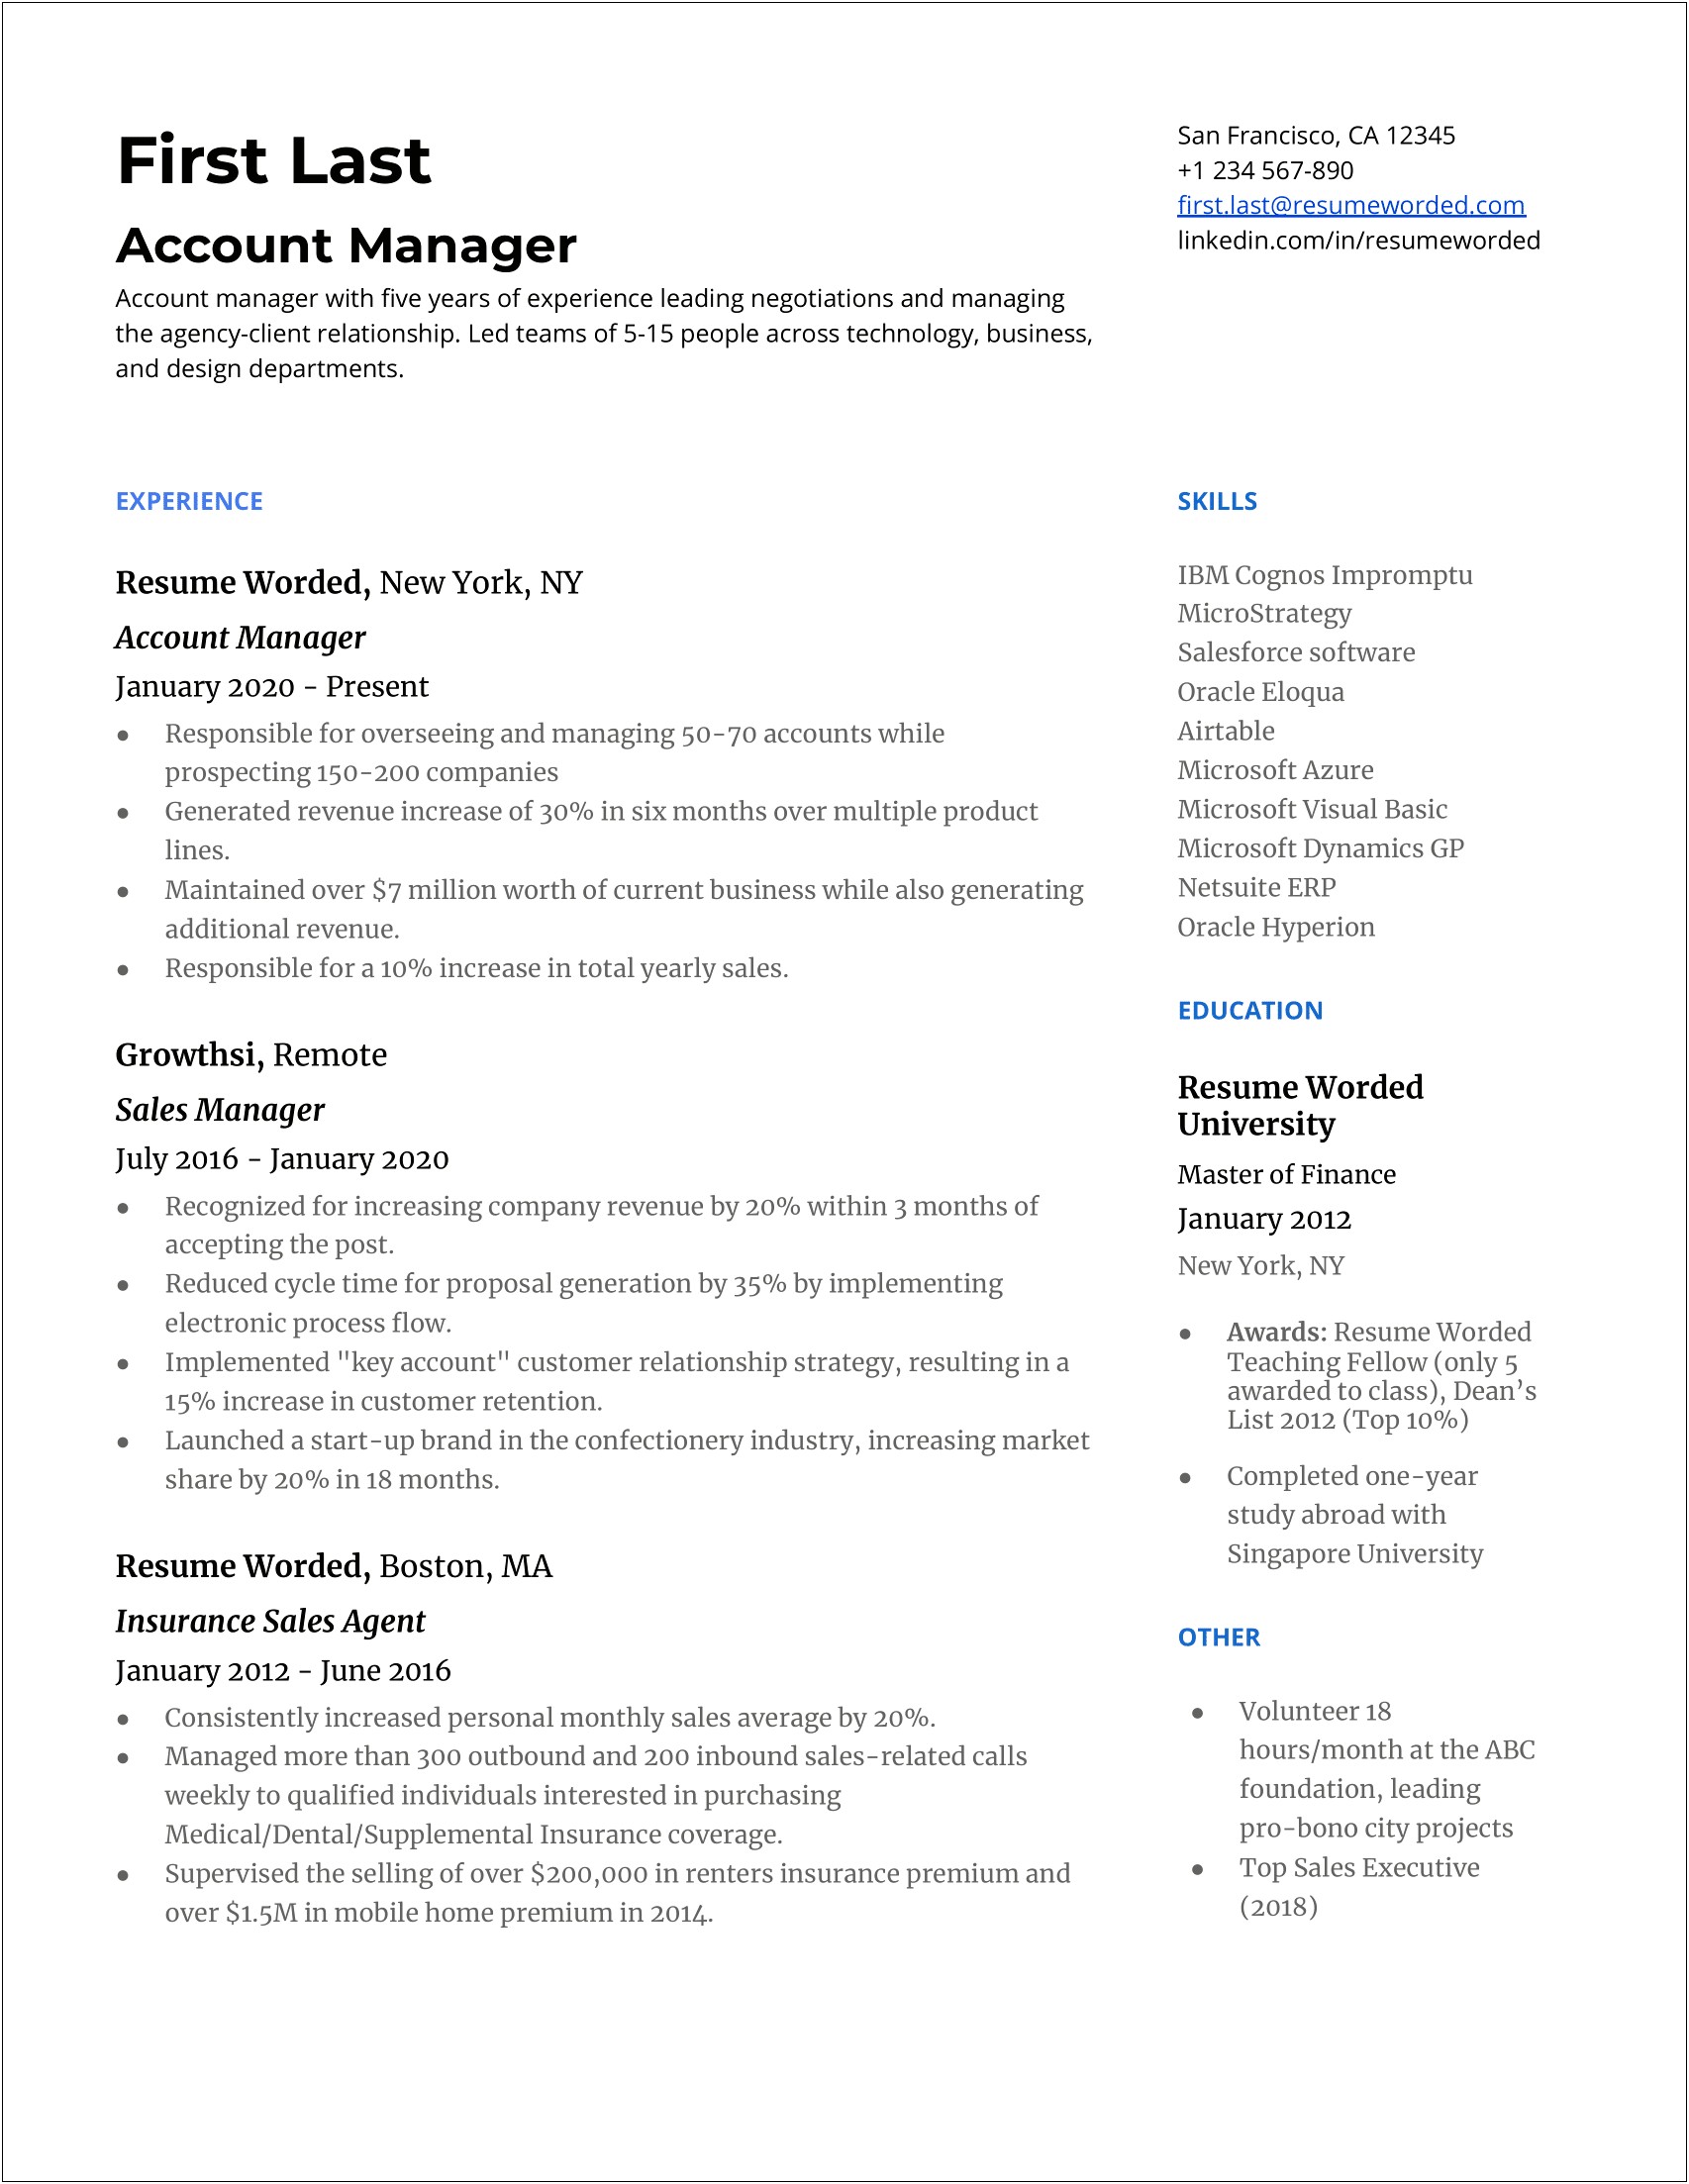 Key Account Manager Resume Objective